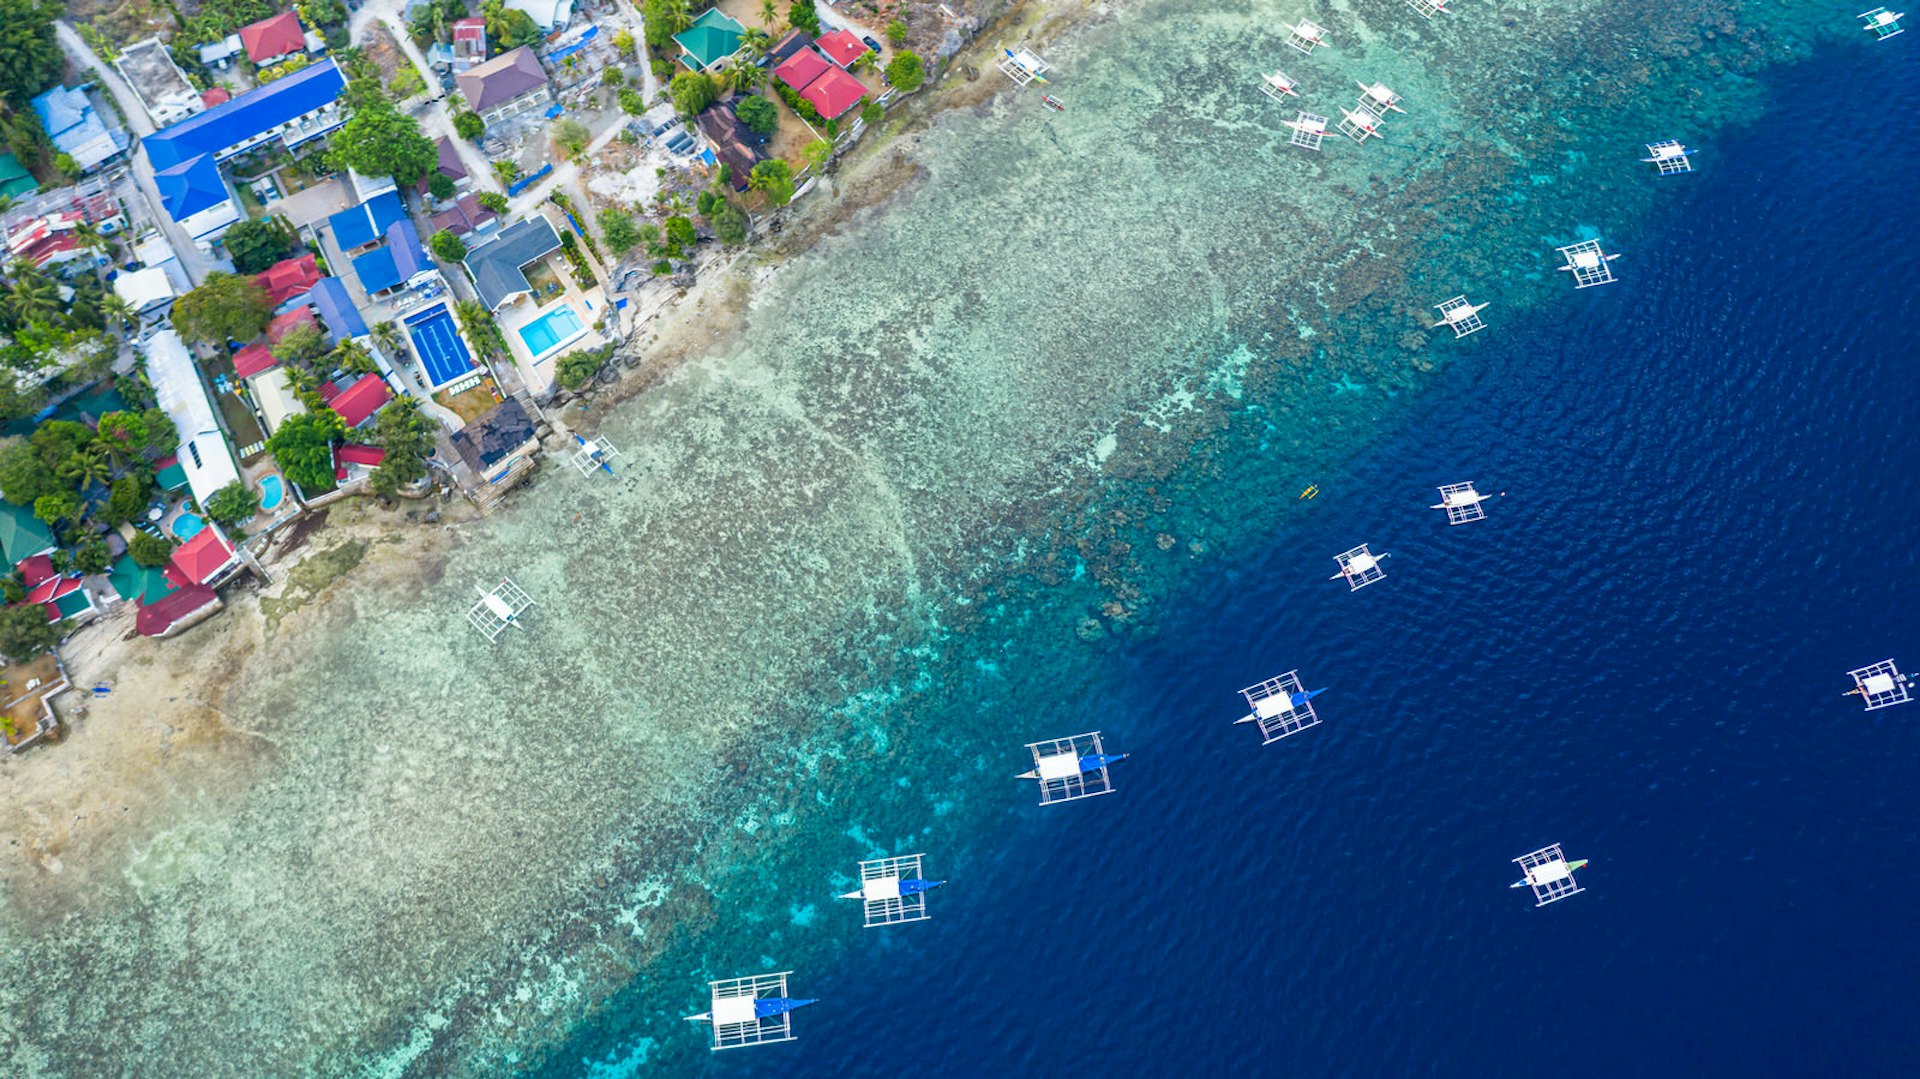 An aerial shot of Filipino boats floating on clear blue waters along the coast of Moalboal, Cebu. There is a narrow beach and colourful houses on the land.